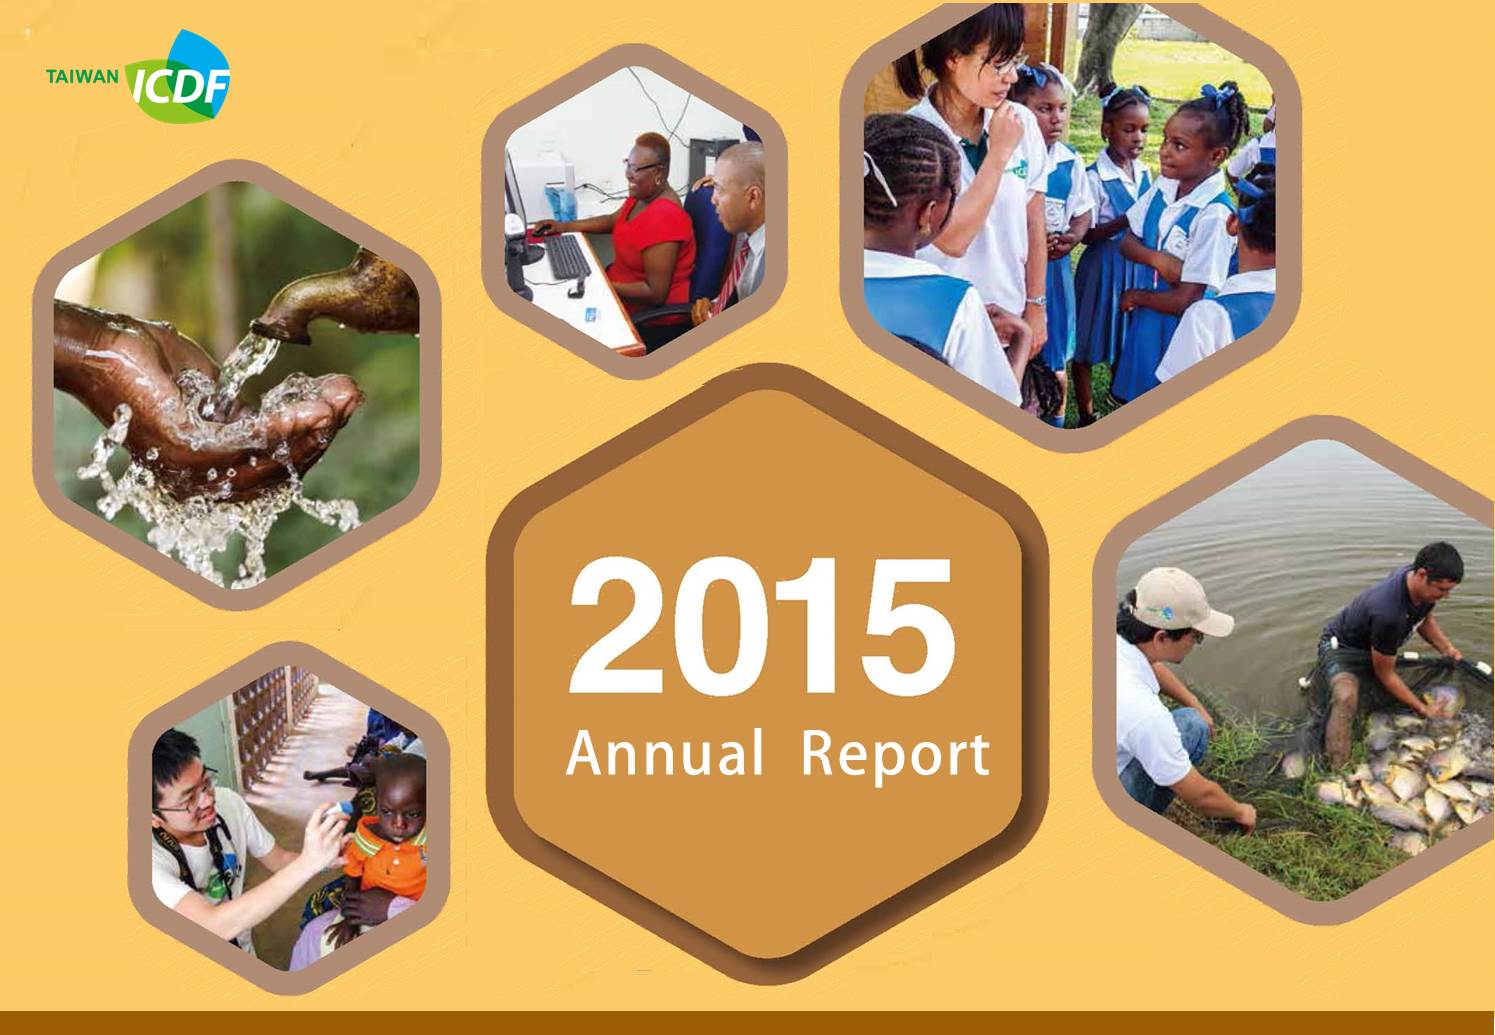 TaiwanICDF 2015 Annual Report in short video